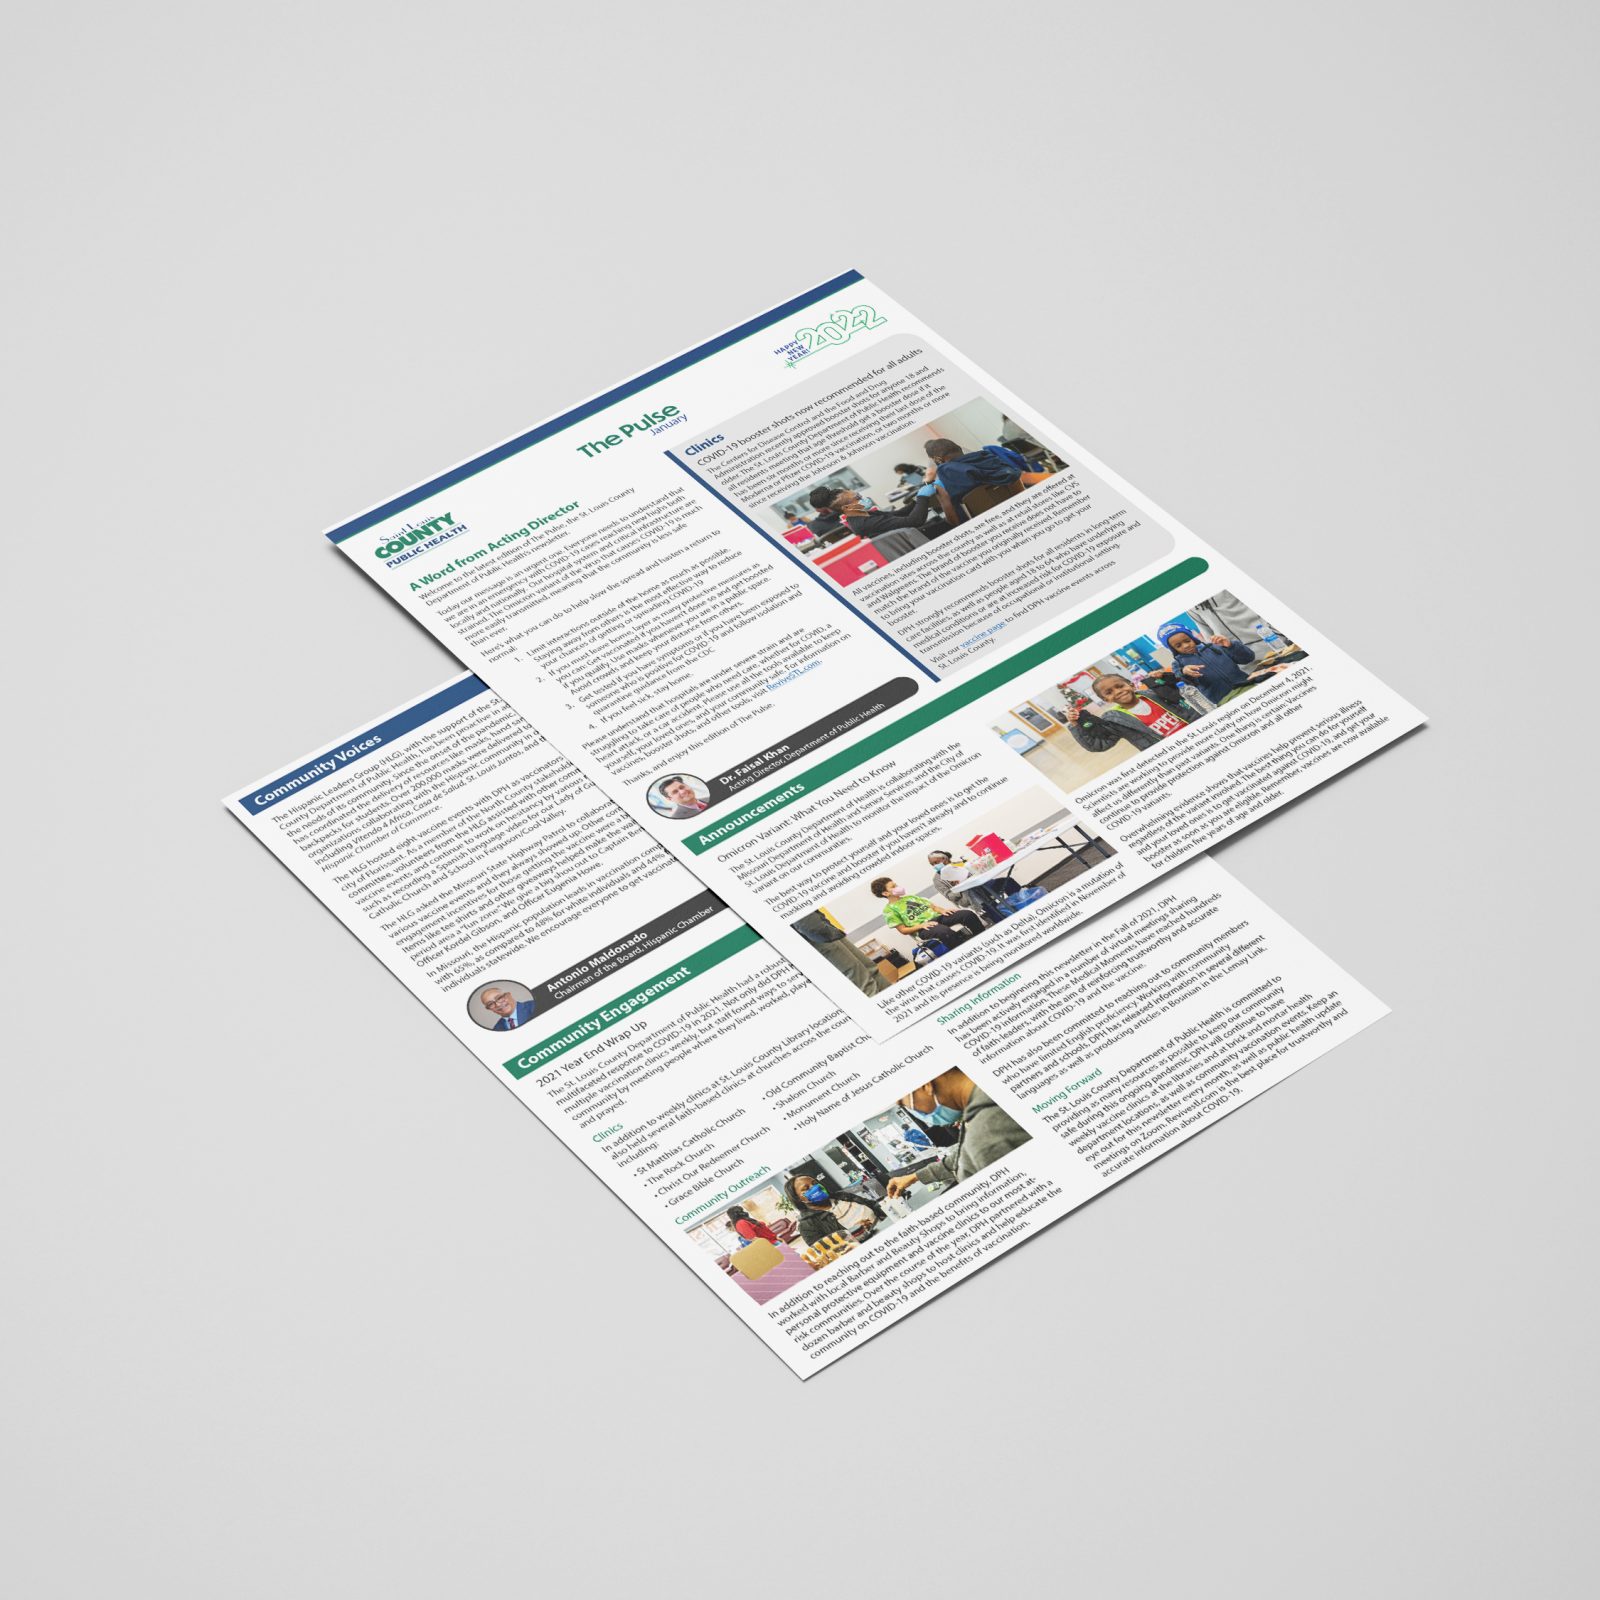 St. Louis Department of Health Newsletter Layout and Design